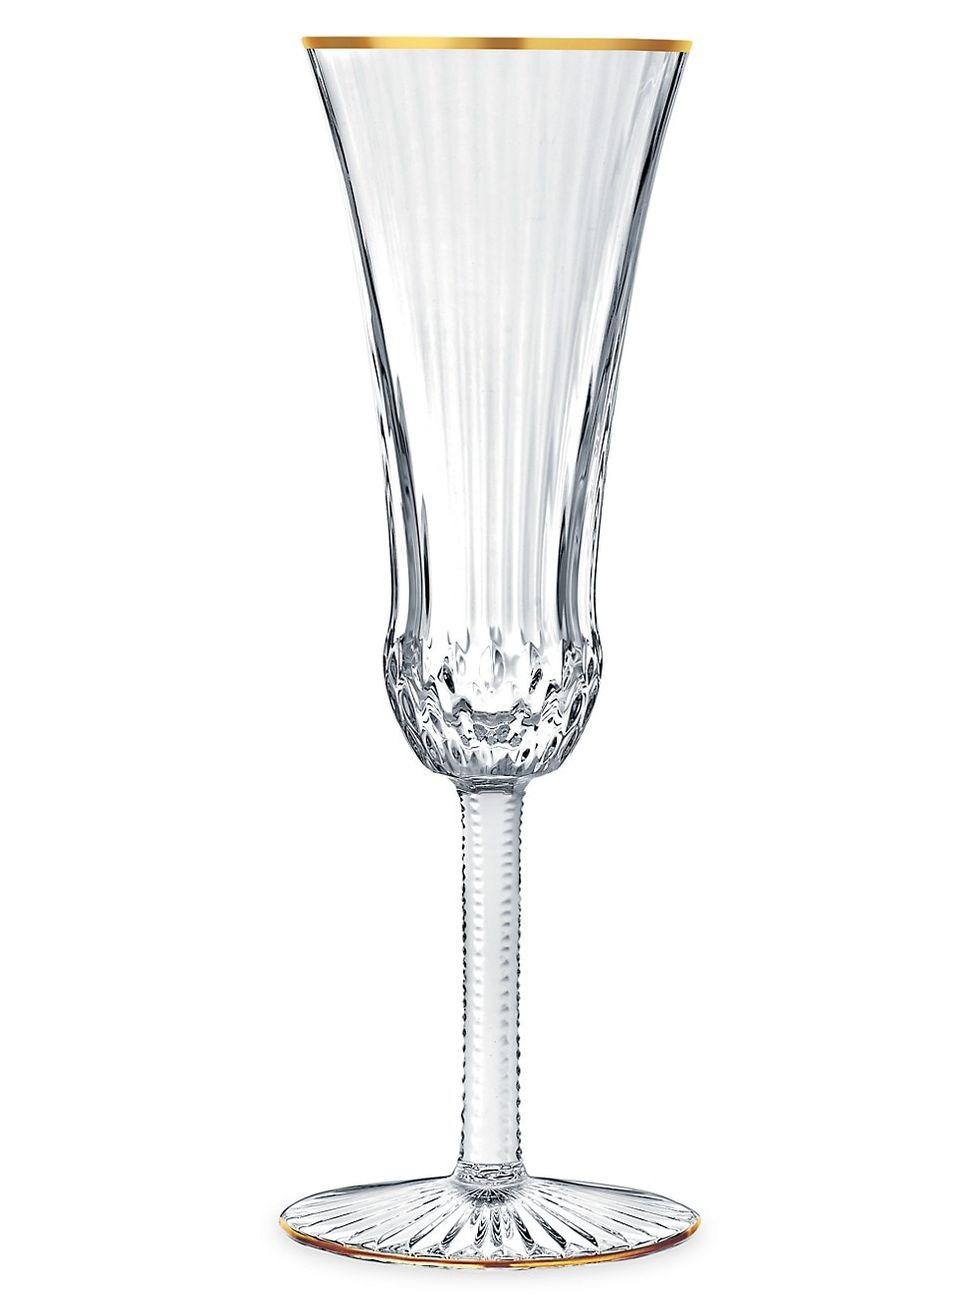 Apollo Filet Or Crystal Champagne Flute